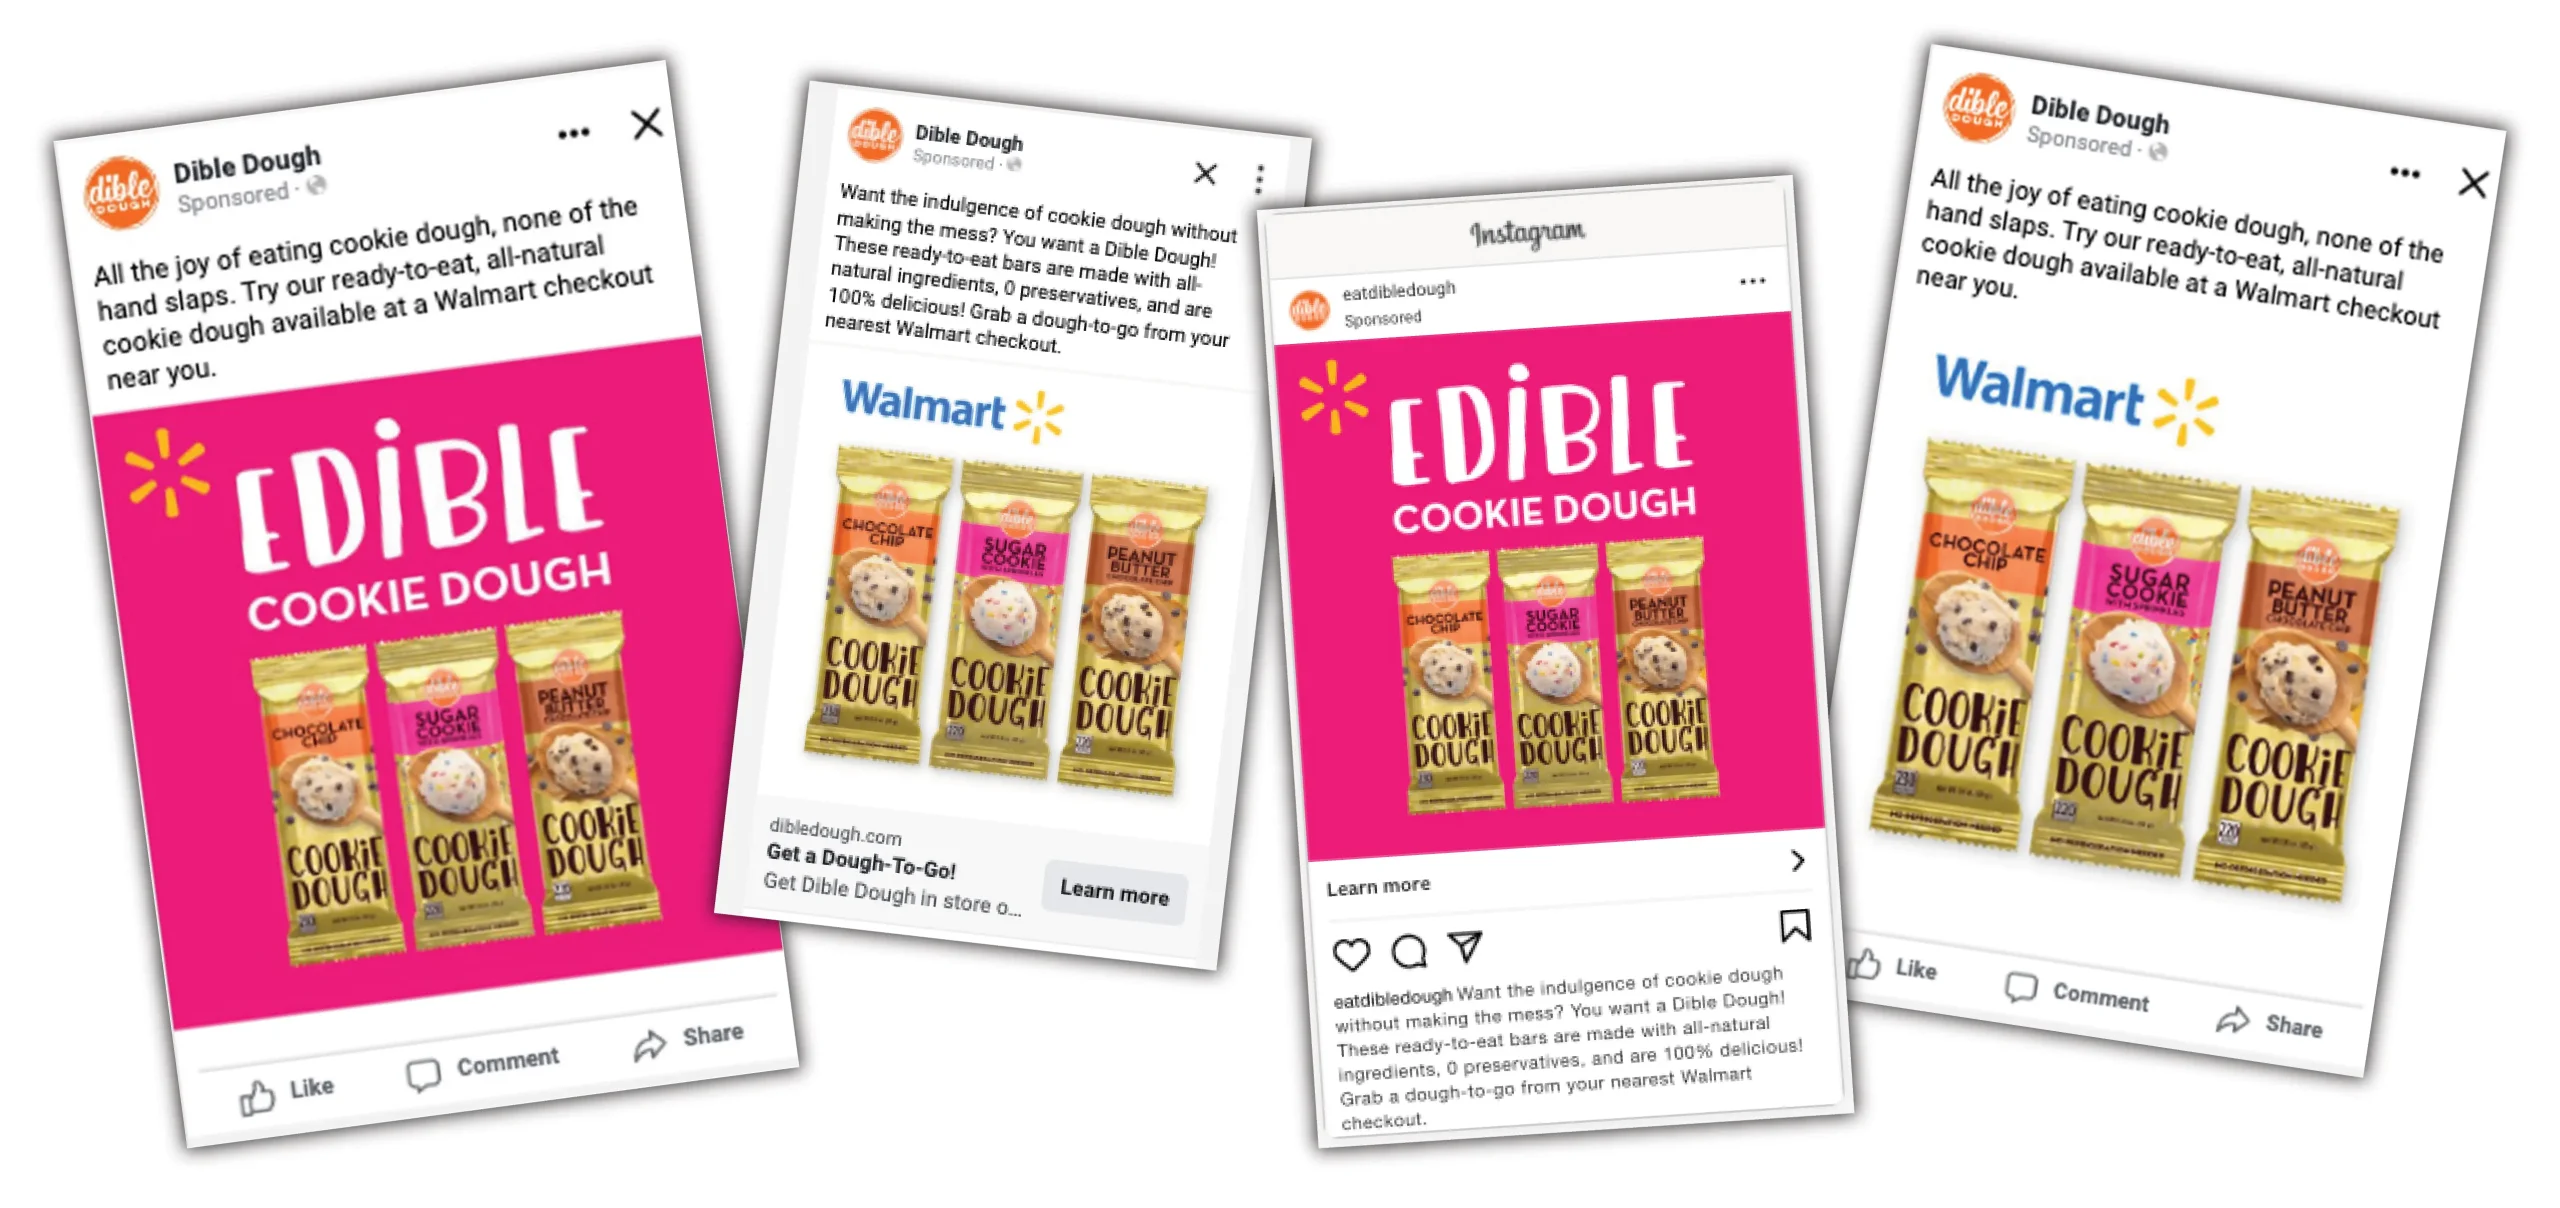 Dible Dough Marketing Campaign - selection of digital ads featured in social media and Walmart stores